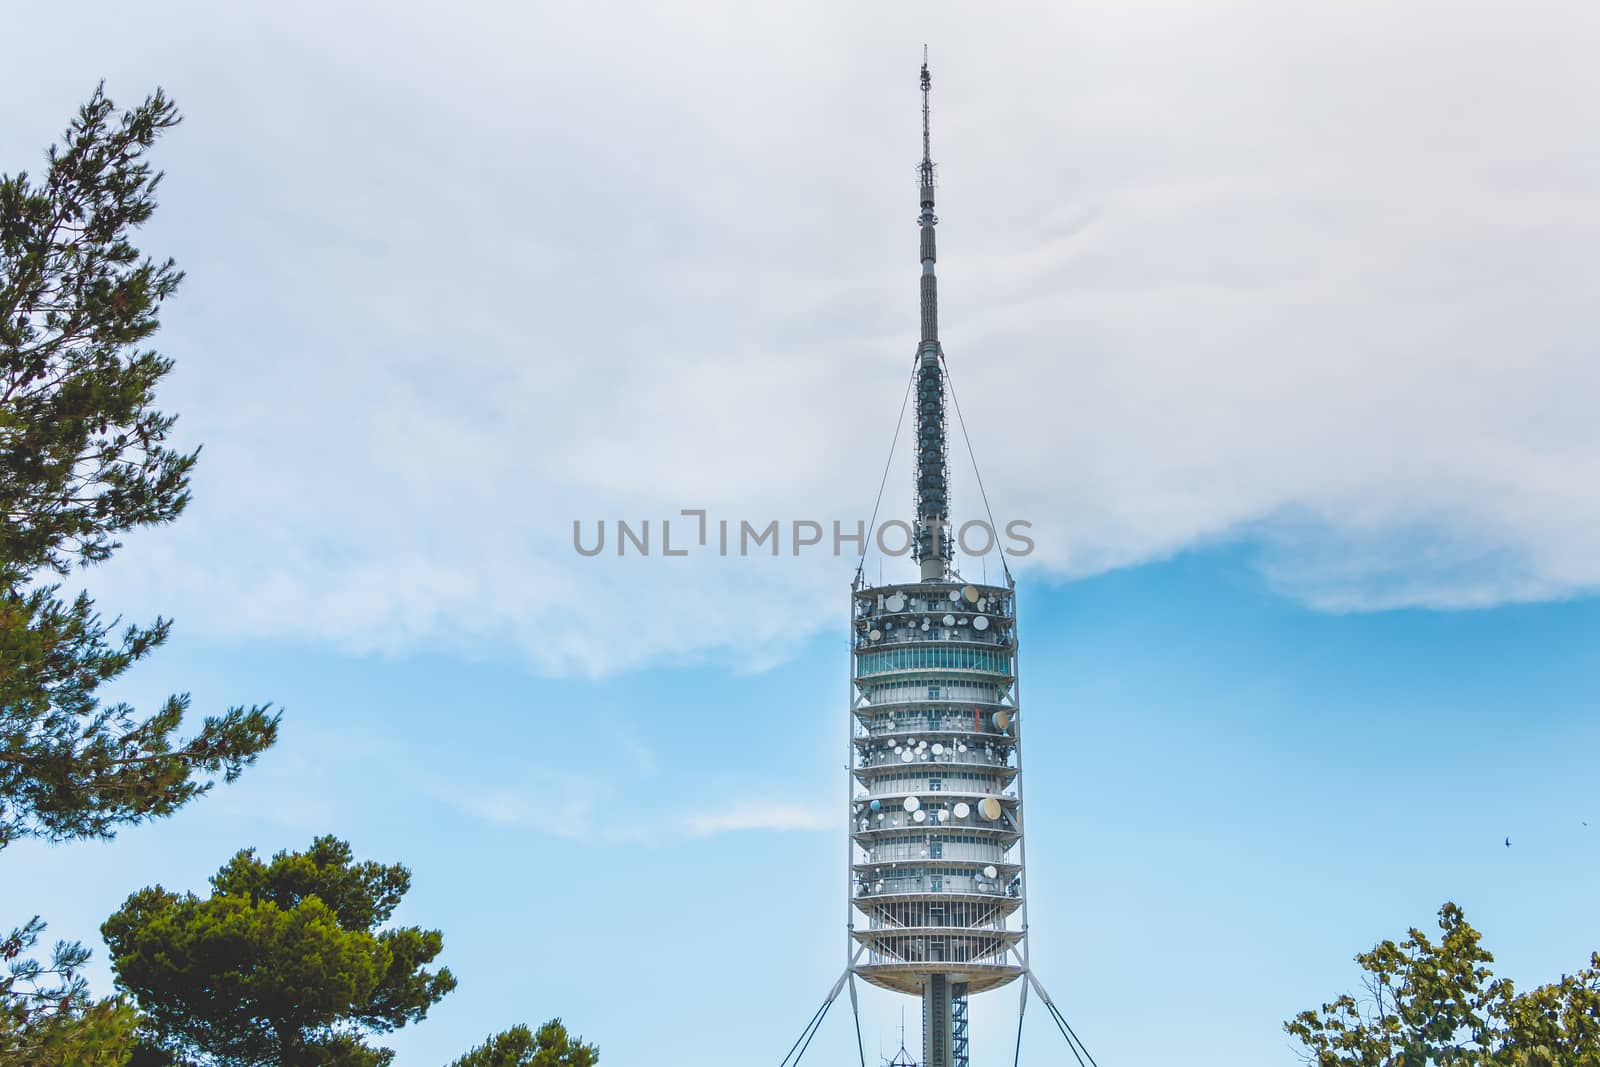 Barcelona, Spain - June 21, 2017: View of the Collserola telecommunications tower on the heights of Barcelona on a summer day